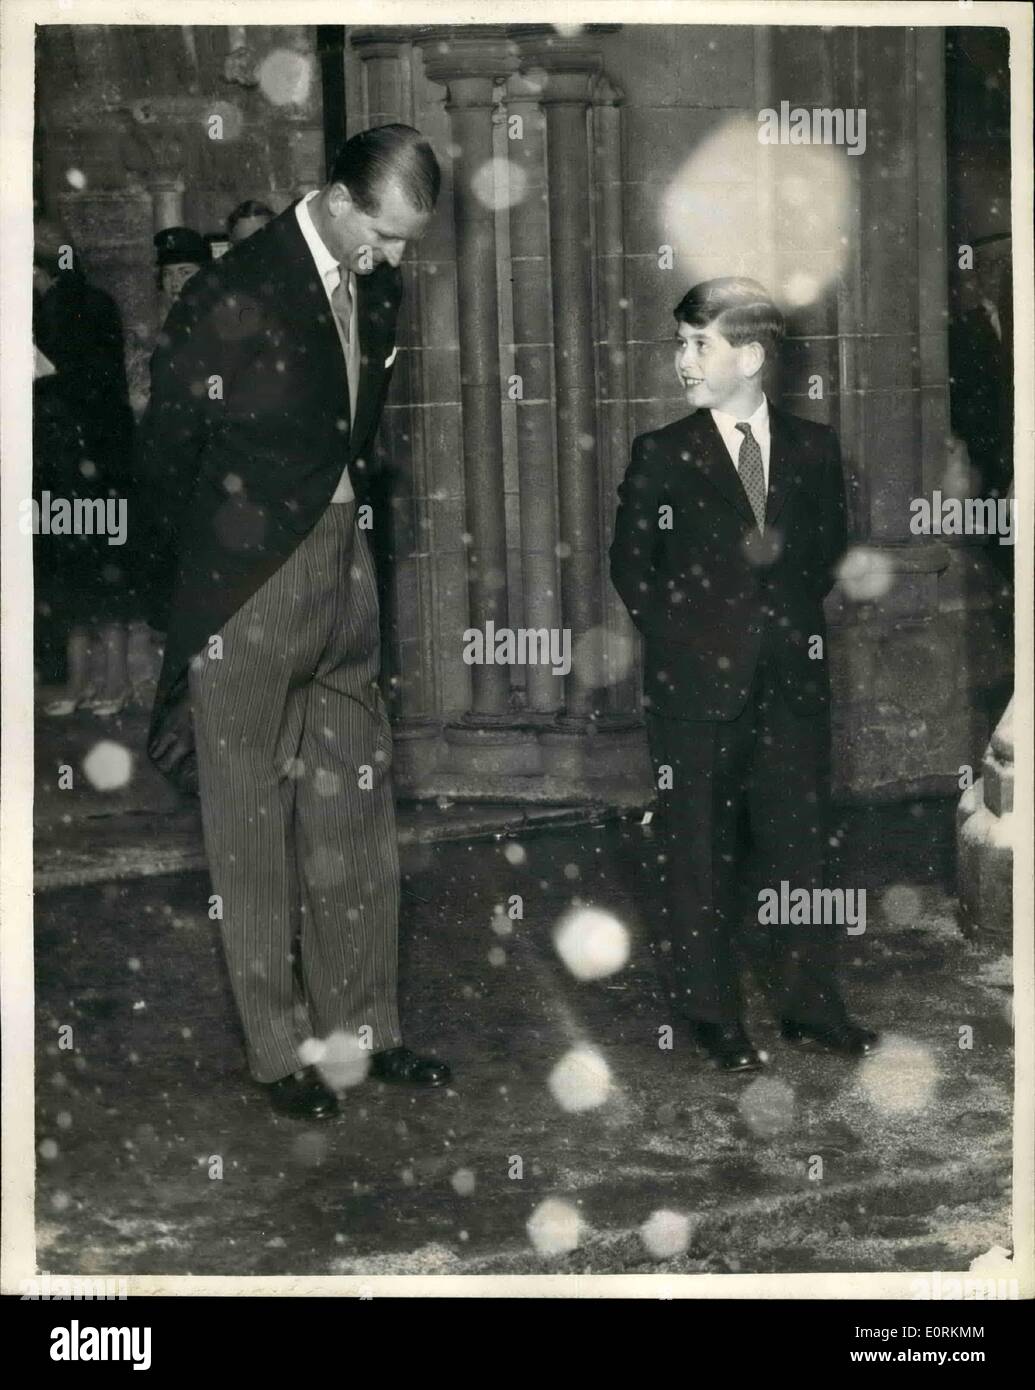 Jan. 01, 1960 - Wedding of Lady Pamela Mountbatten - At Romsey Duke of Edinburgh And Prince Charles: Princes Anne was a brides maid this afternoon for the first time -at the wedding of Lady Pamela Mountbatten to Mr. David Hicks - at Romsey Abbey, Hants. Phot Shows The Duke of Edinburgh and his son Prince Charles - who wears long trousers for the first time - leaving Romsey Abbey after the wedding this afternoon. Stock Photo